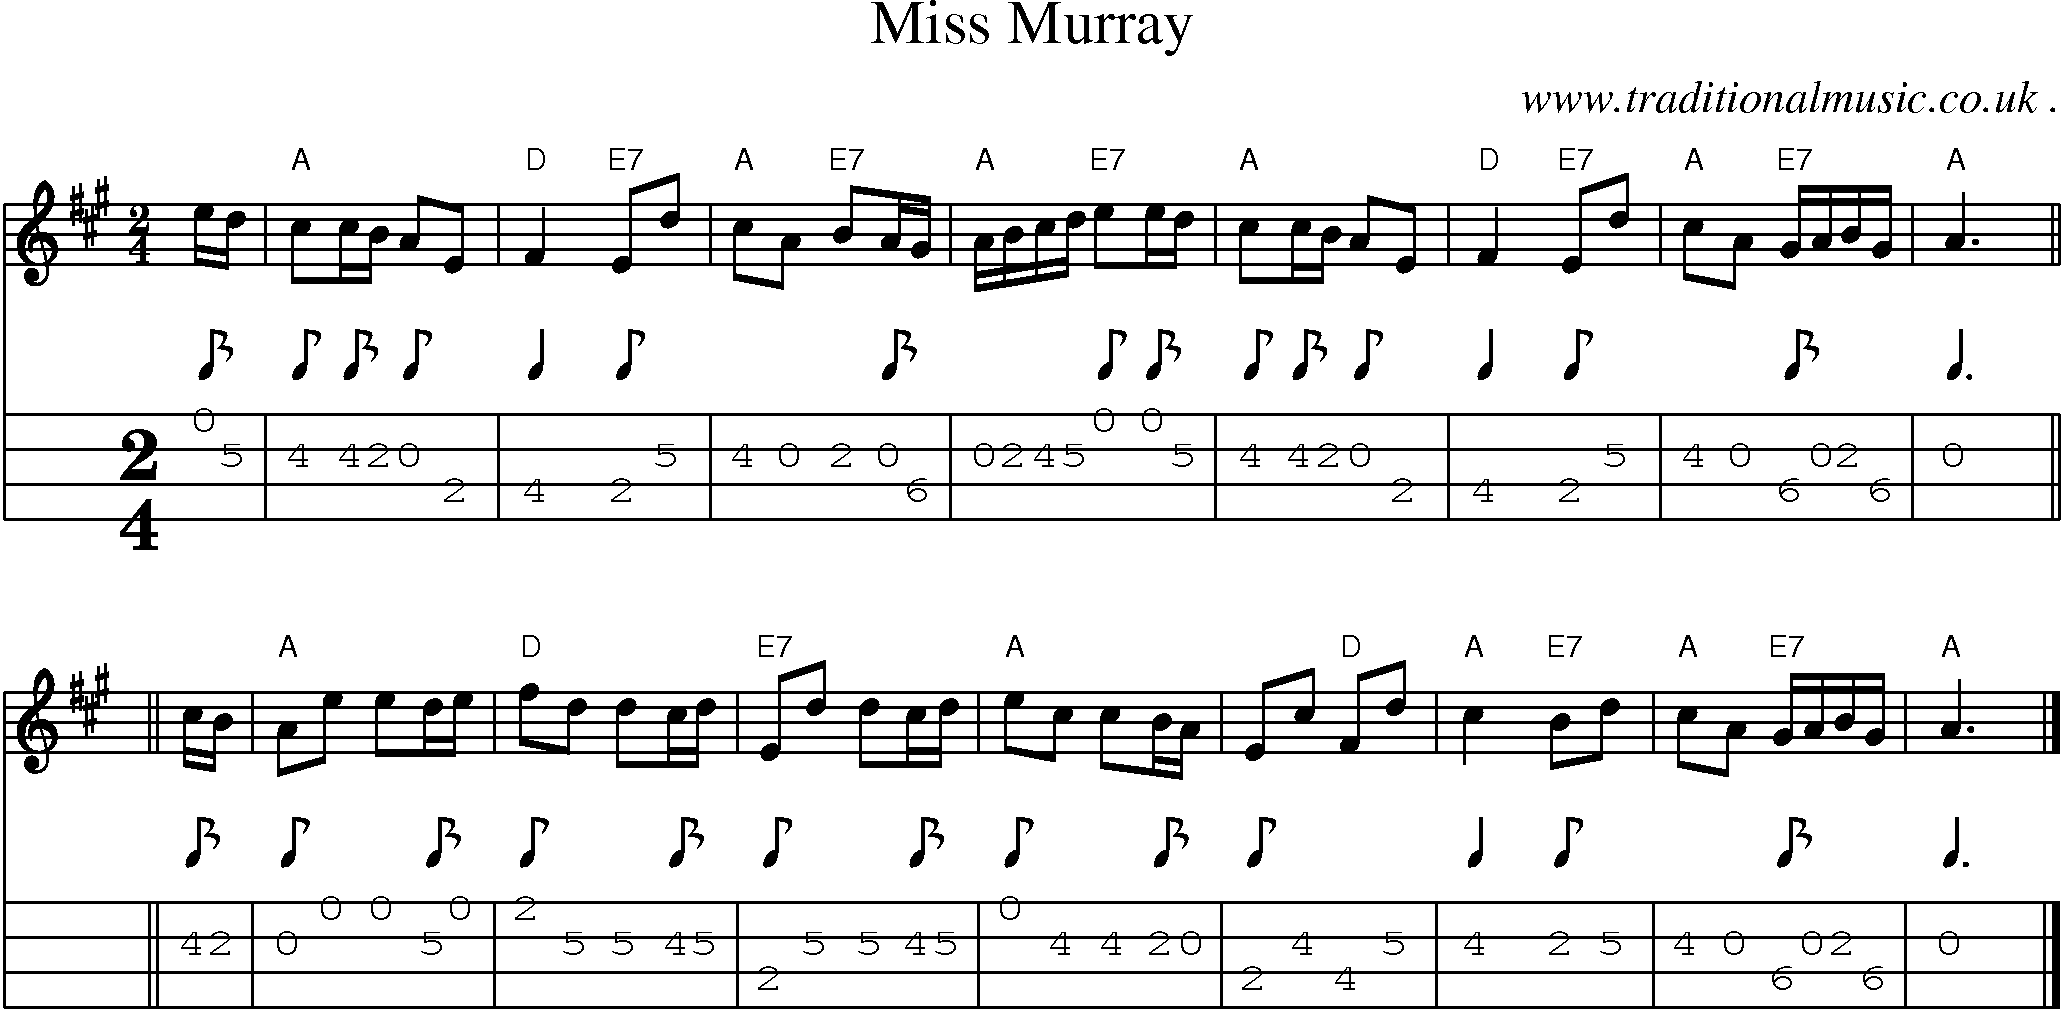 Sheet-music  score, Chords and Mandolin Tabs for Miss Murray